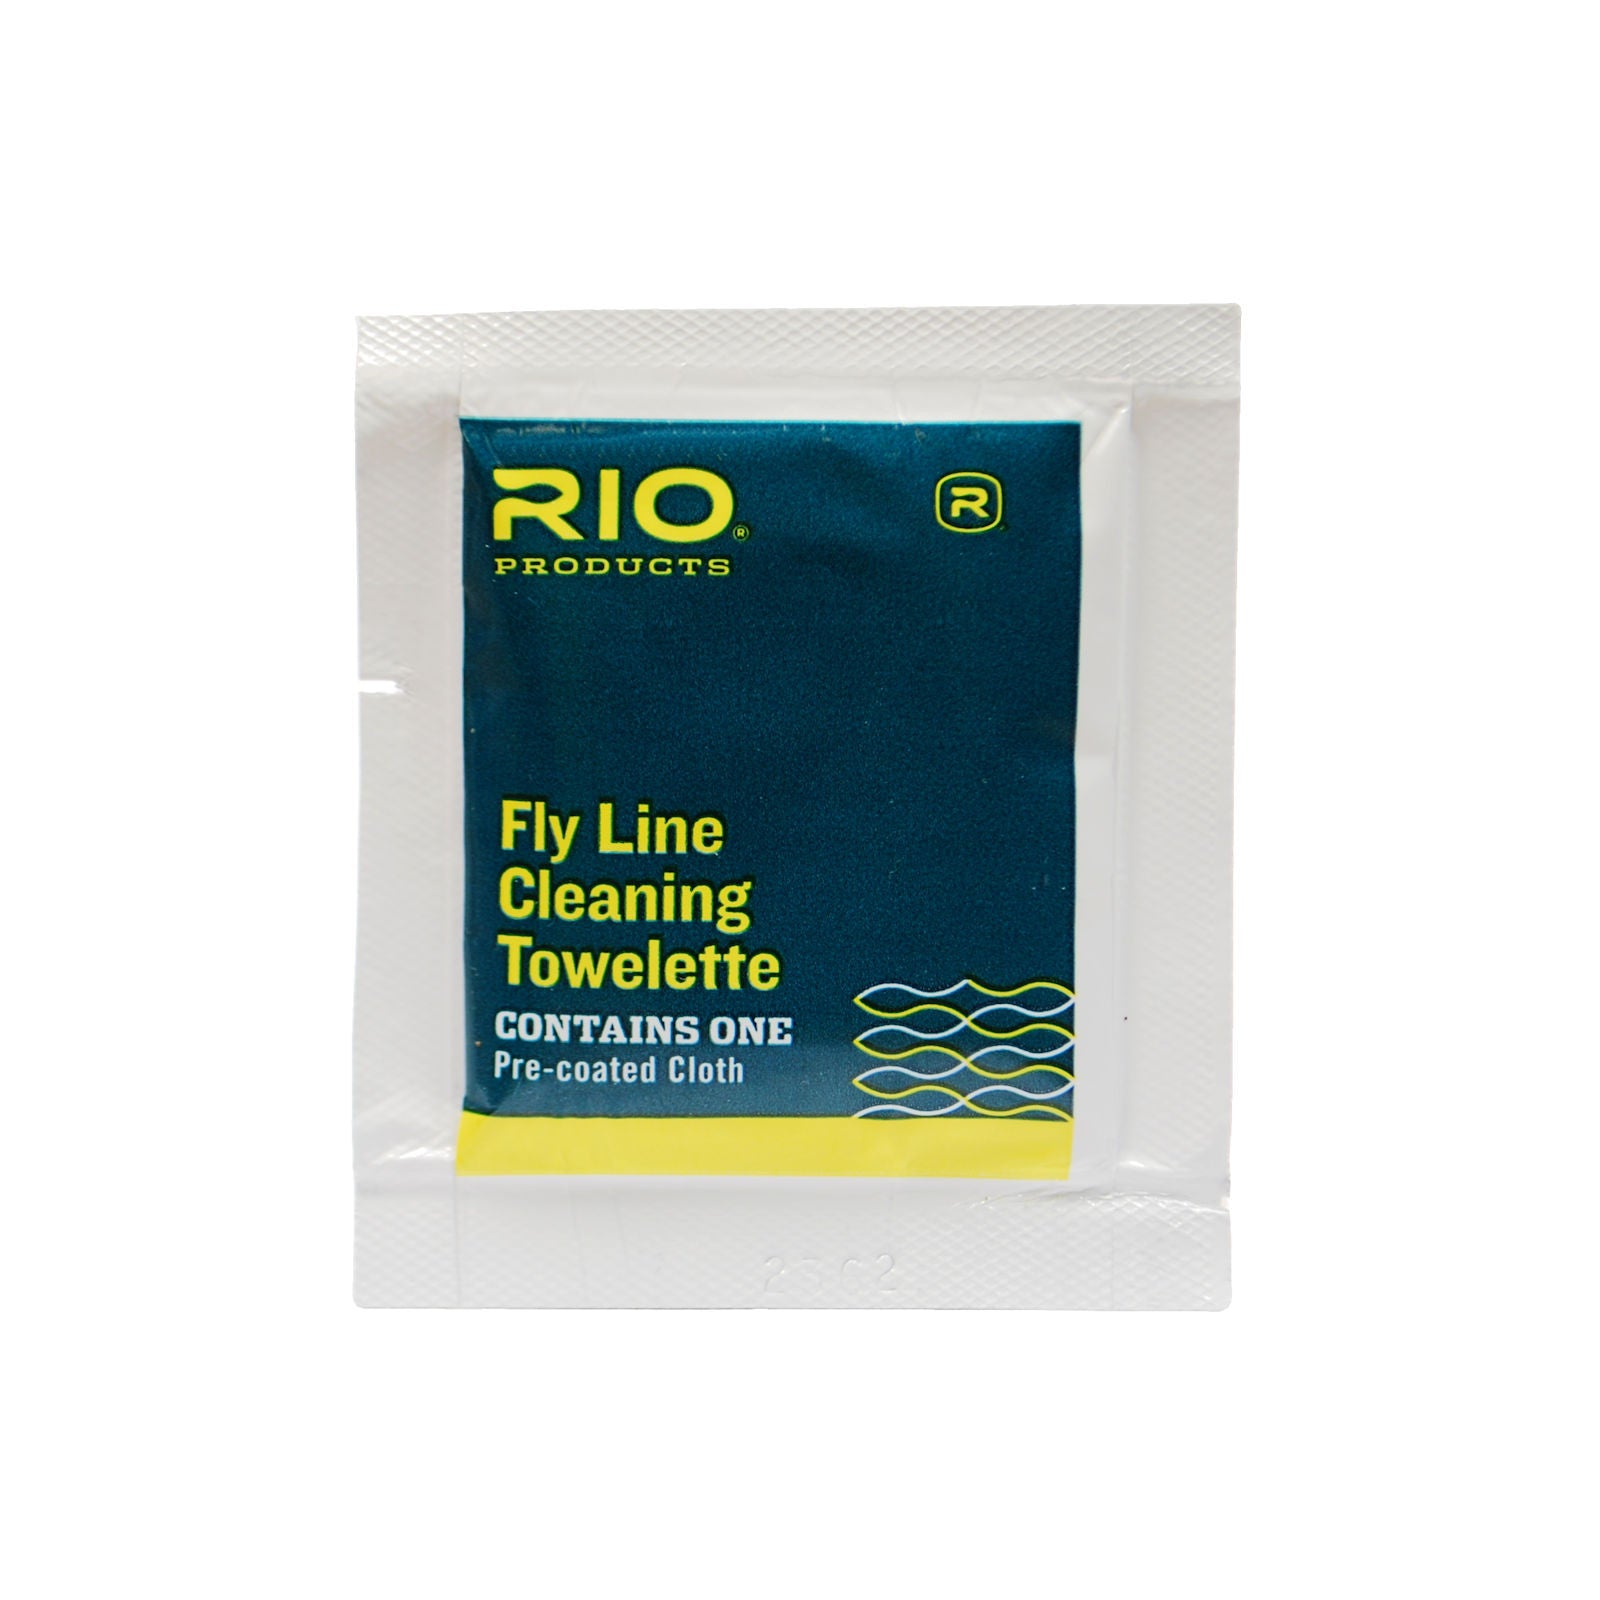 https://cdn.shopify.com/s/files/1/0211/7110/products/rio-fly-line-cleaning-towelette.jpg